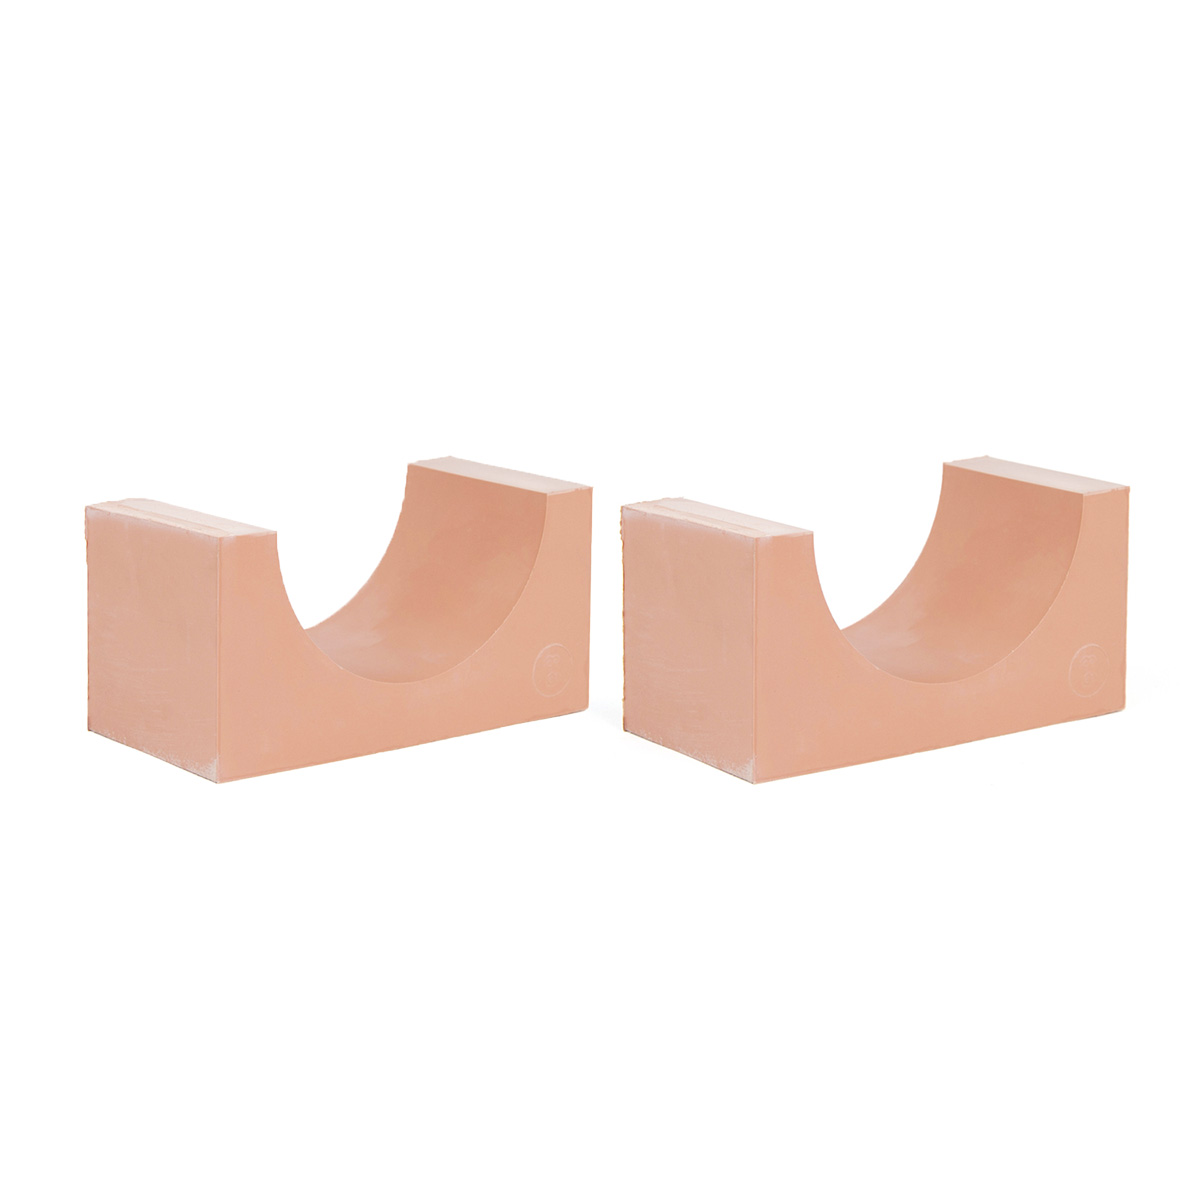 120-90*2 Set of 2 half insert block lycron, 120-90 for cable/pipe diam. 89.5-91.5mm